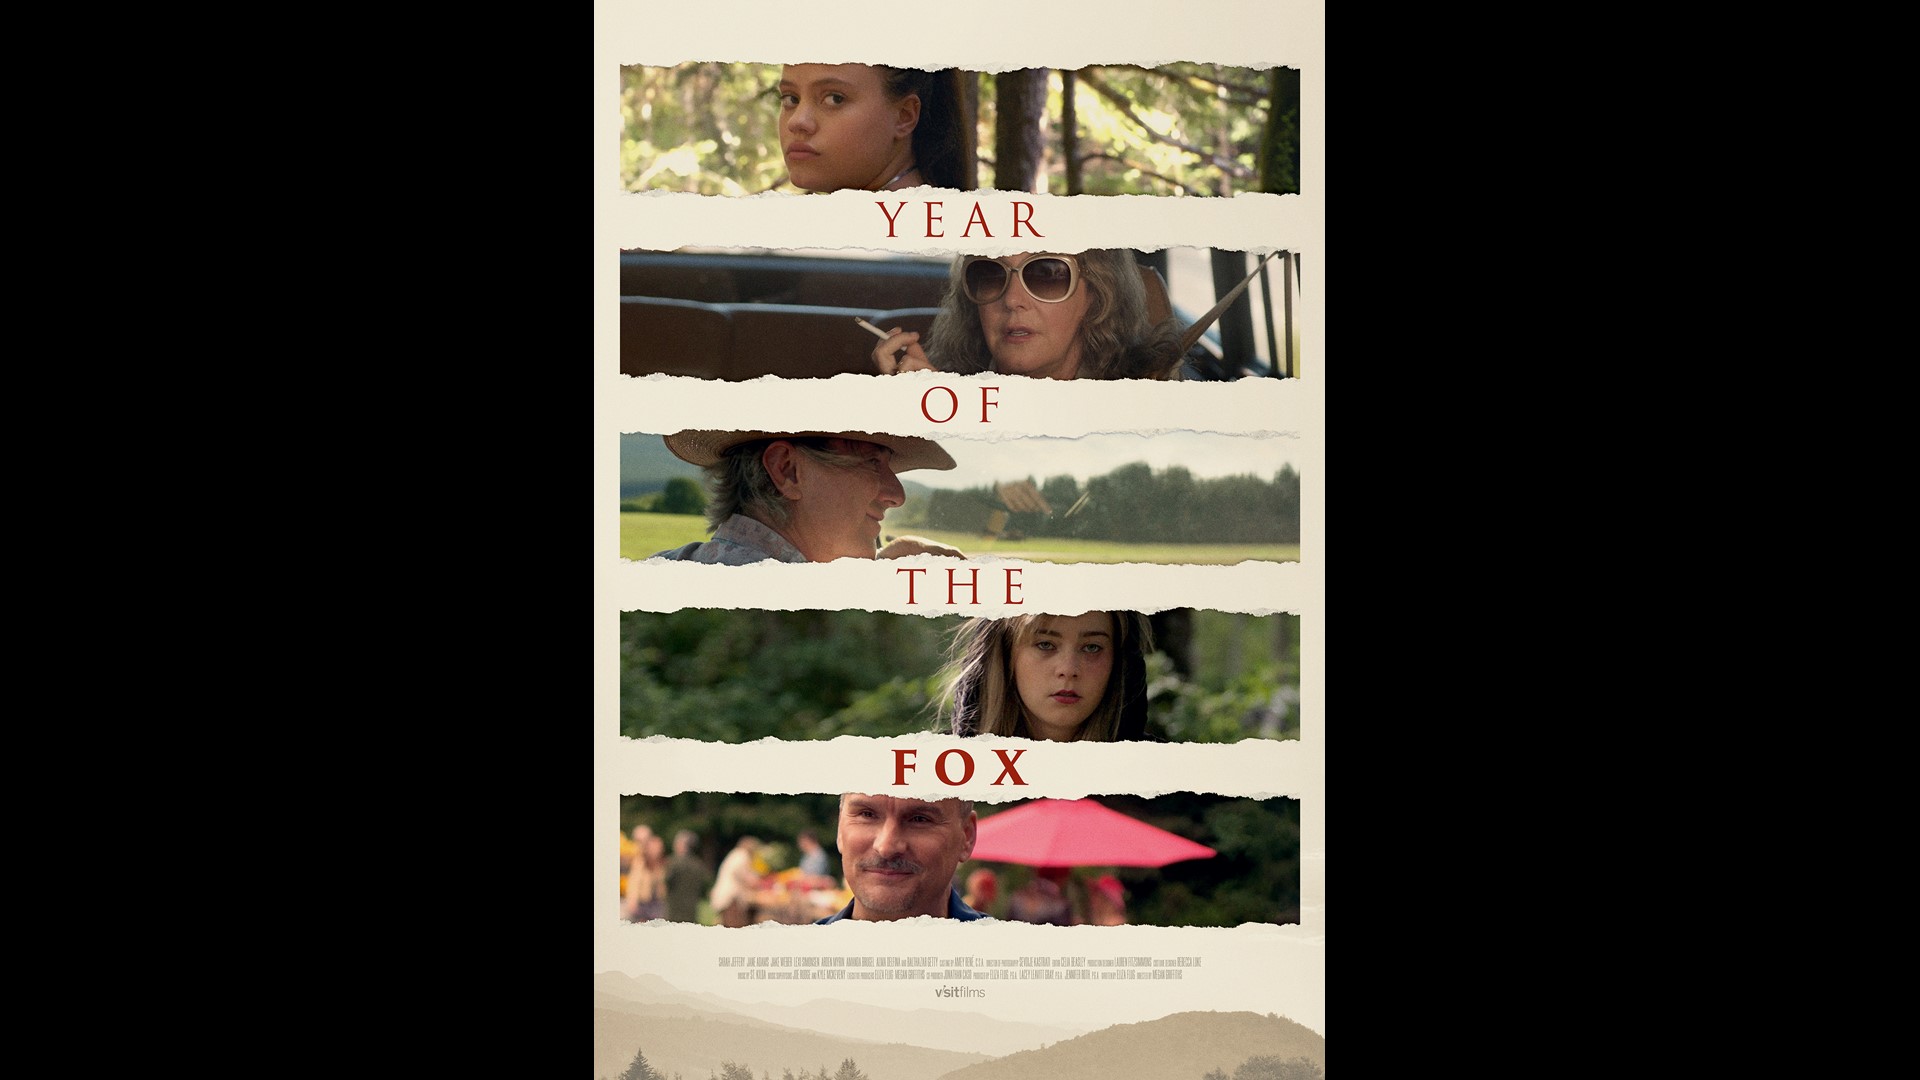 Director Megan Griffiths and writer Eliza Flug shared their experiences working on the Seattle-based film "Year of the Fox" that premiered at SIFF 2023 on May 12